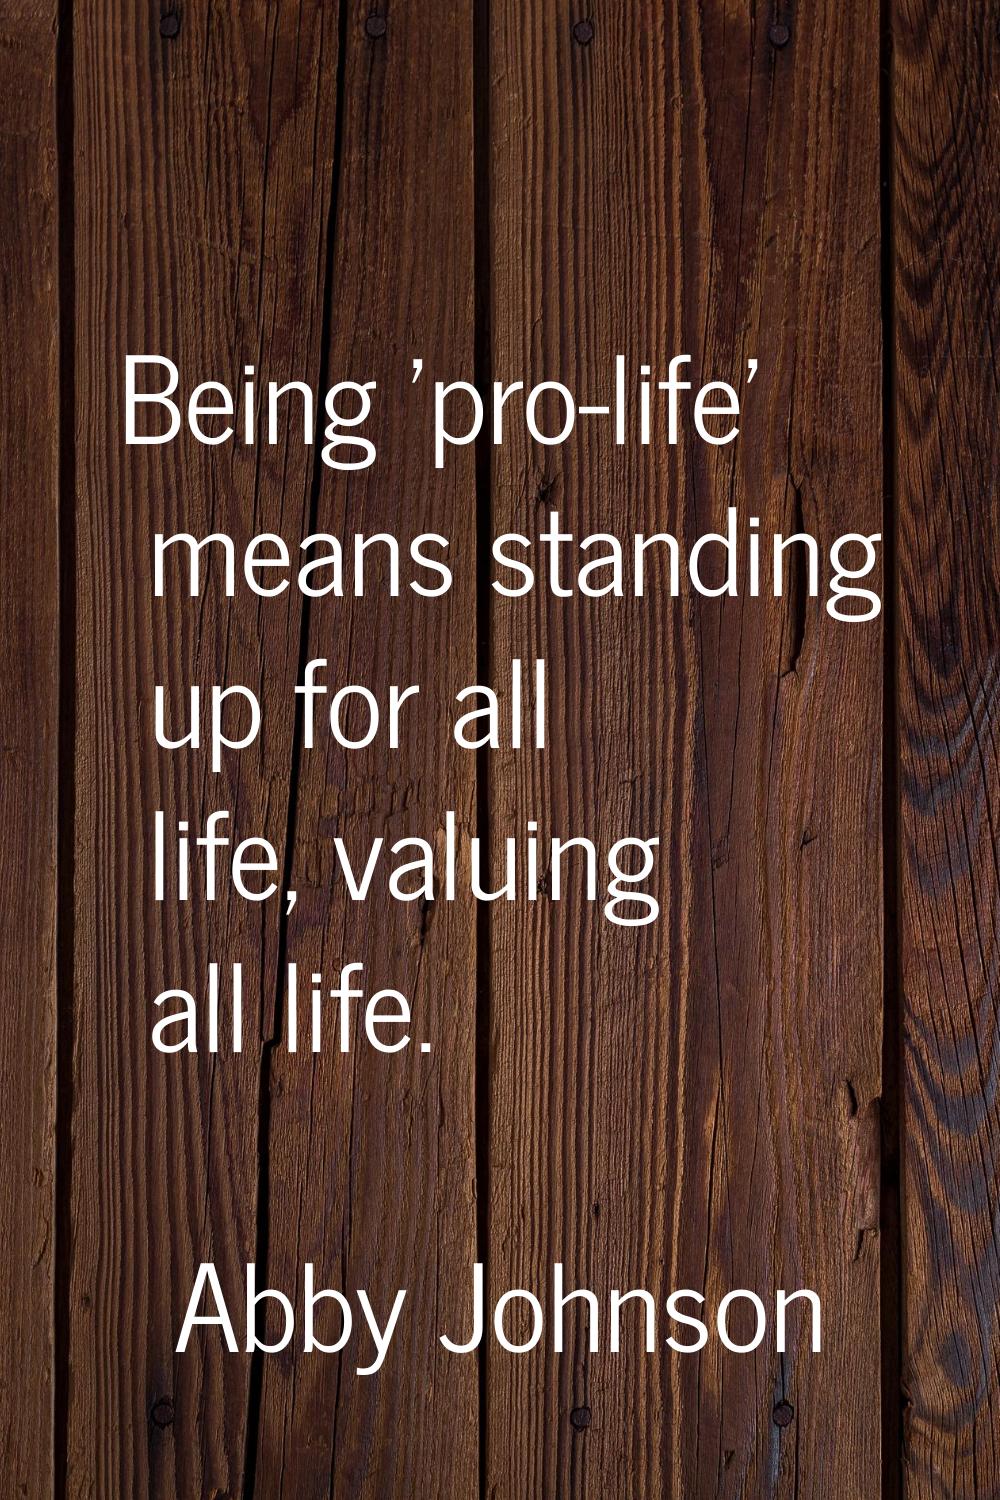 Being 'pro-life' means standing up for all life, valuing all life.